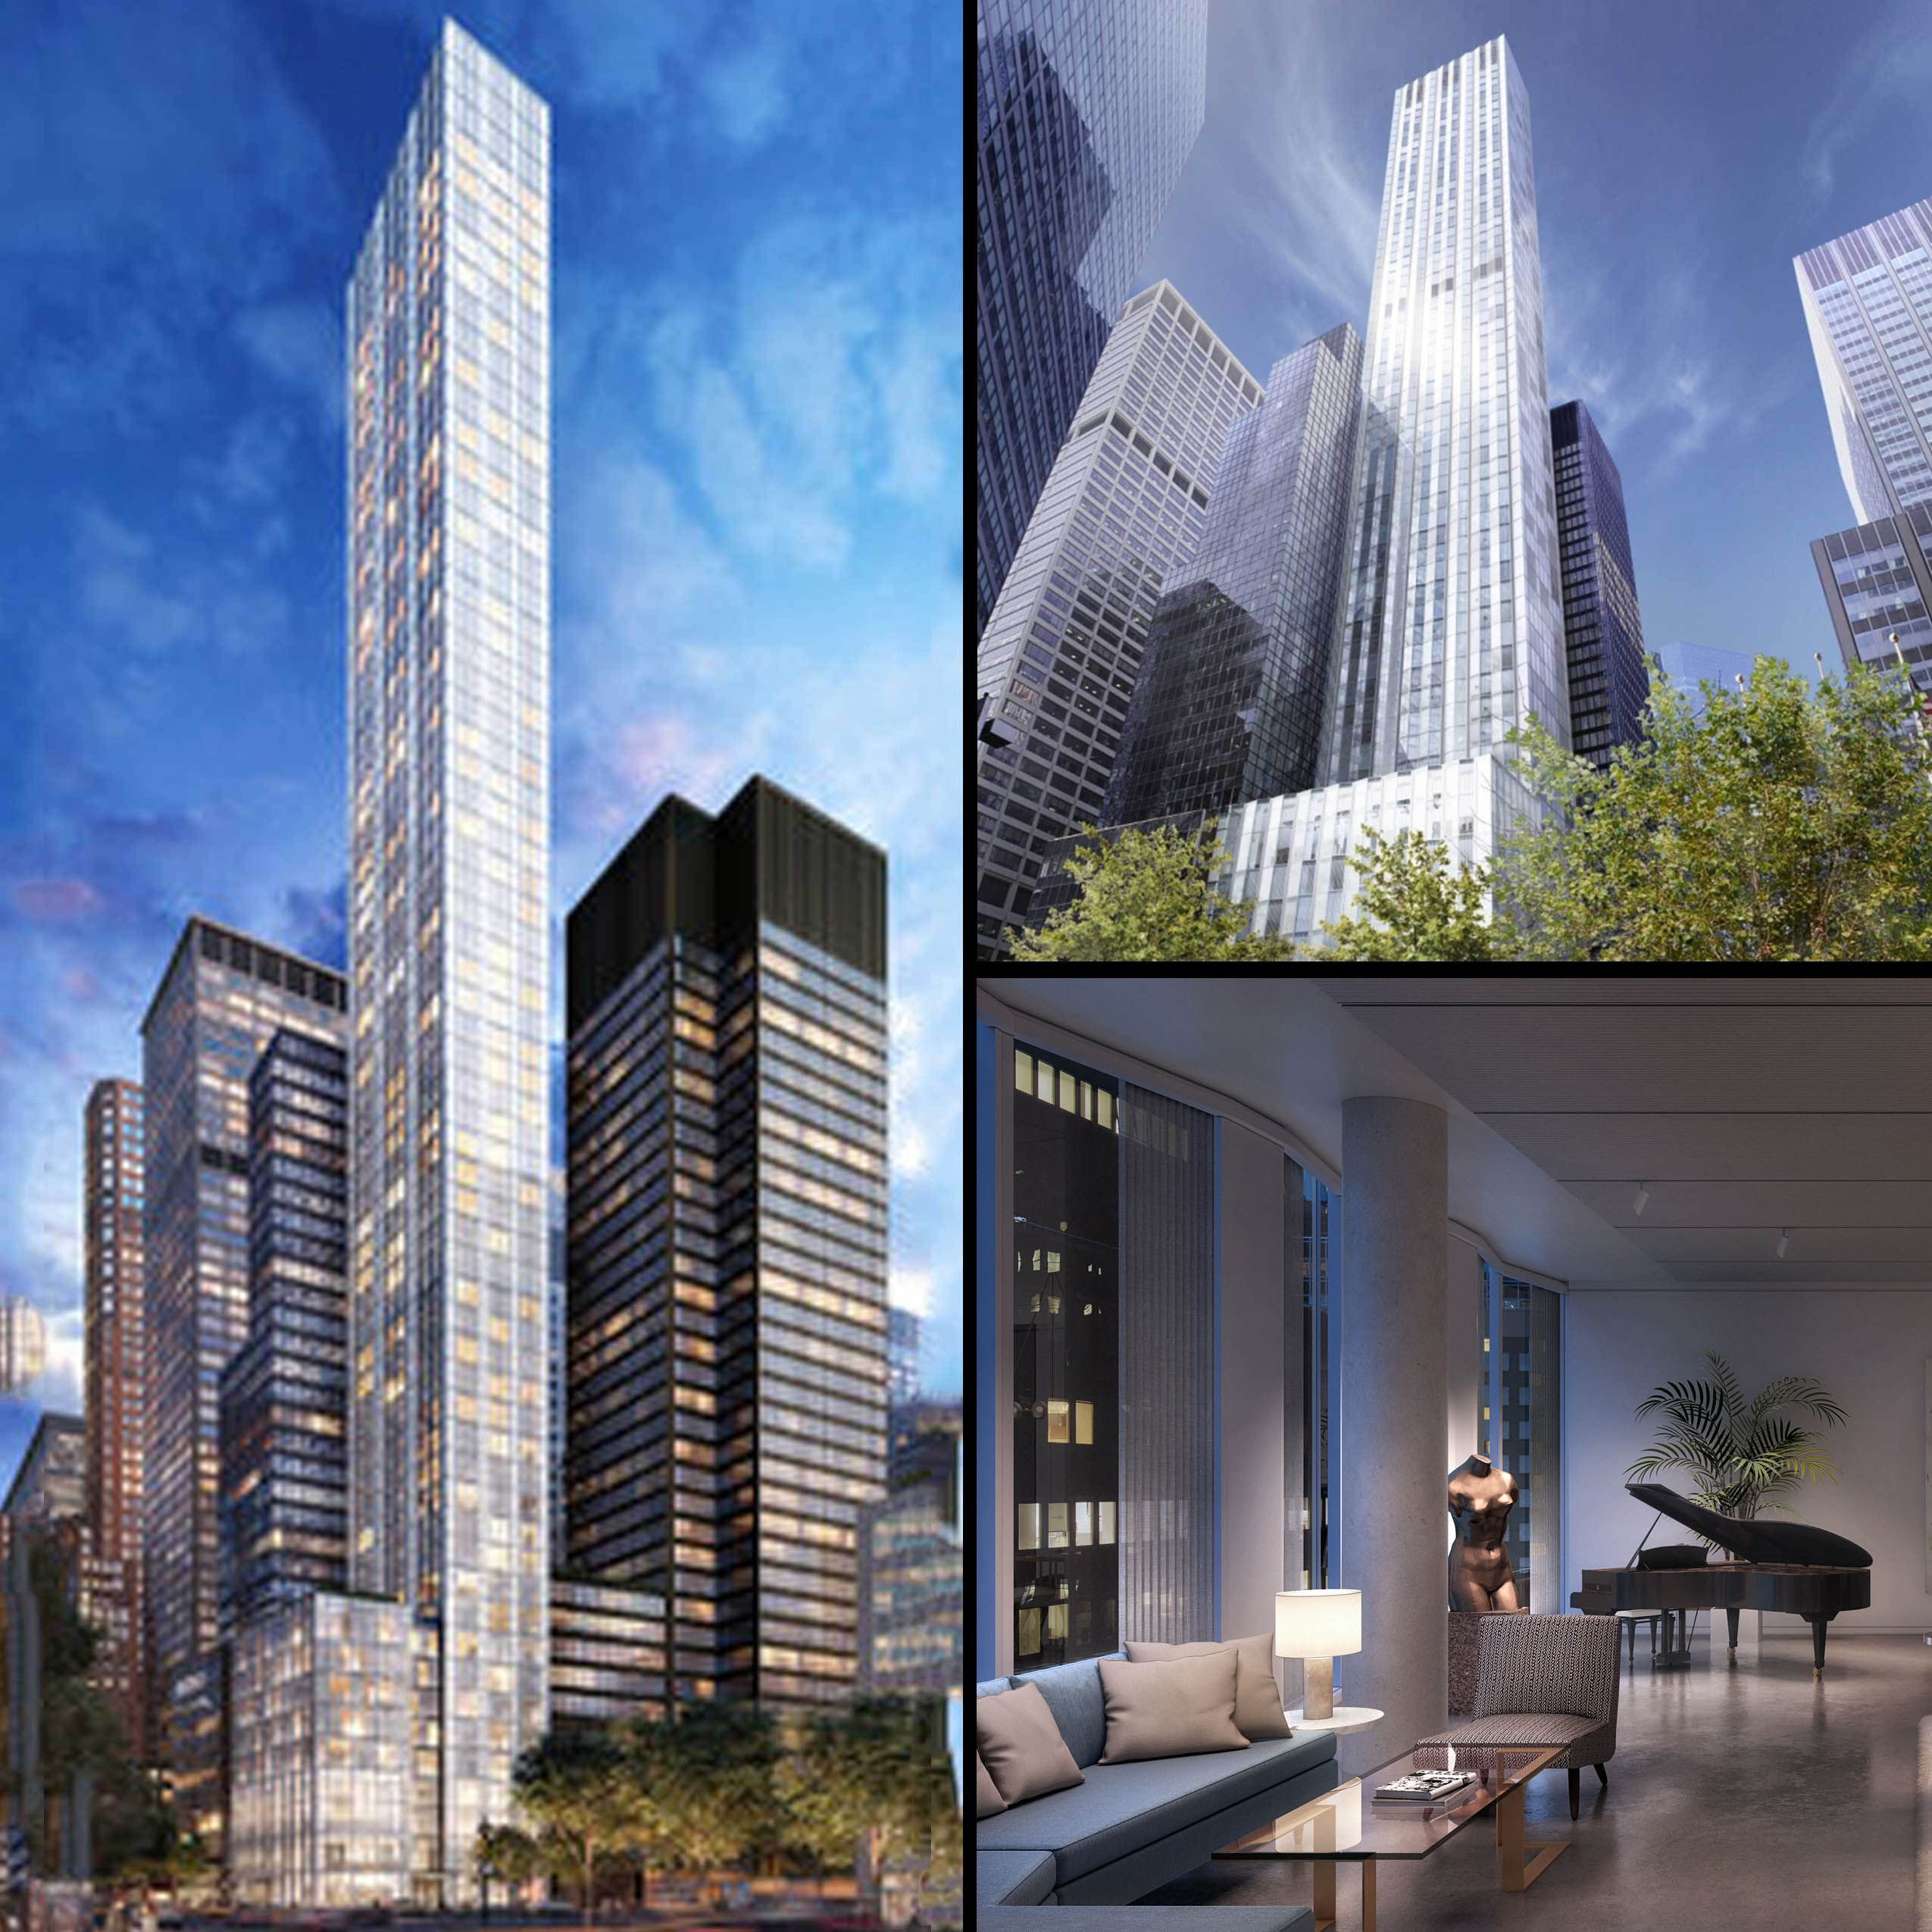 Consolis' High-Rise Building projects - Consolis